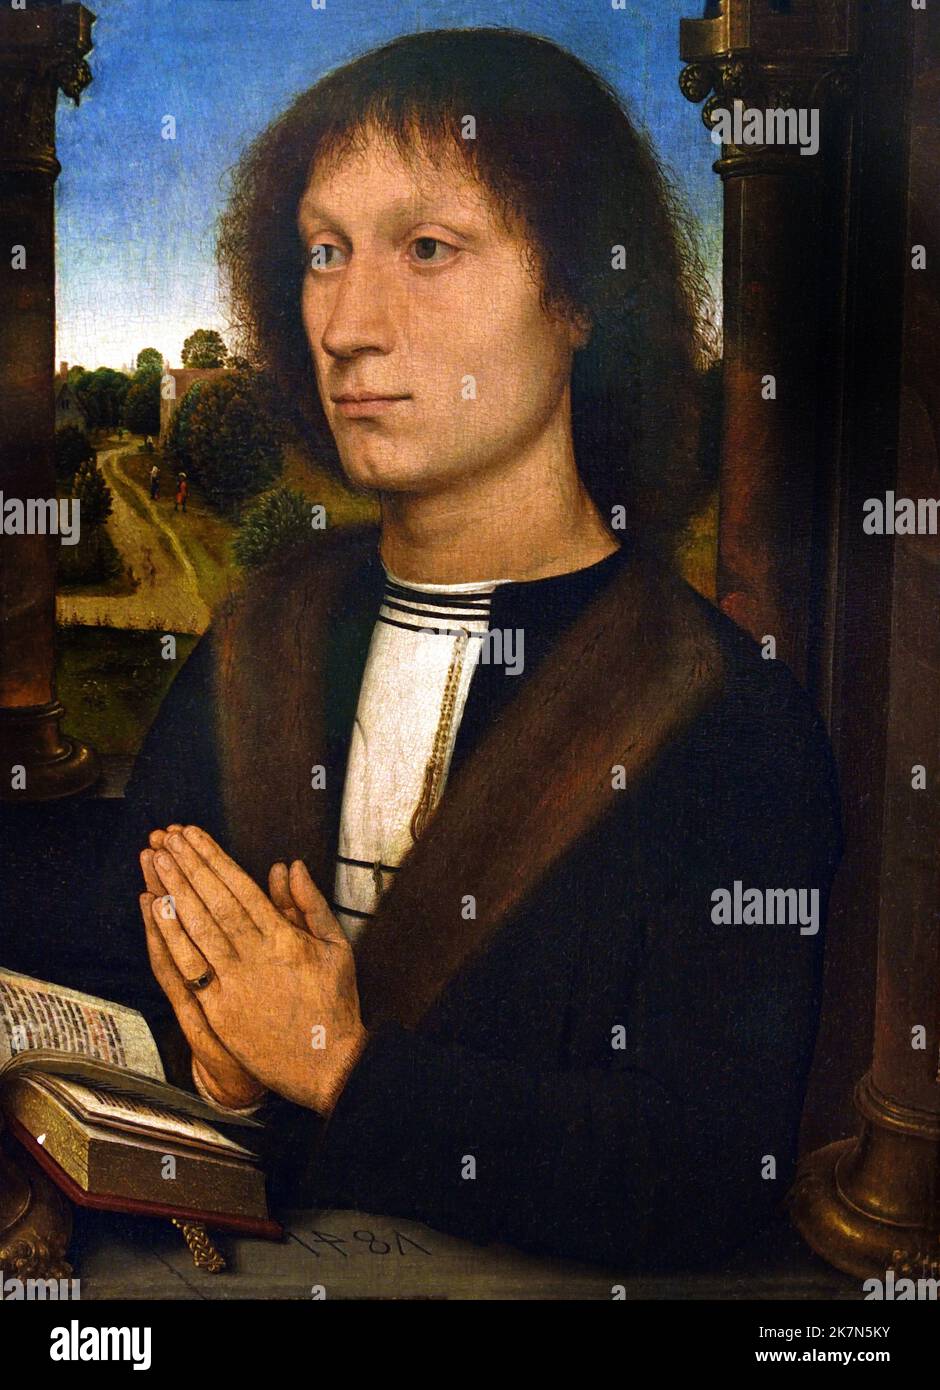 Benedetto Portinari triptych: Right wing 1487  Portrait of a Praying ManBenedetto Portinari 1487 Hans Memling (Memlinc ) 1430 –1494 German painter who moved to Flanders and worked in the tradition of Early Netherlandish painting. Stock Photo